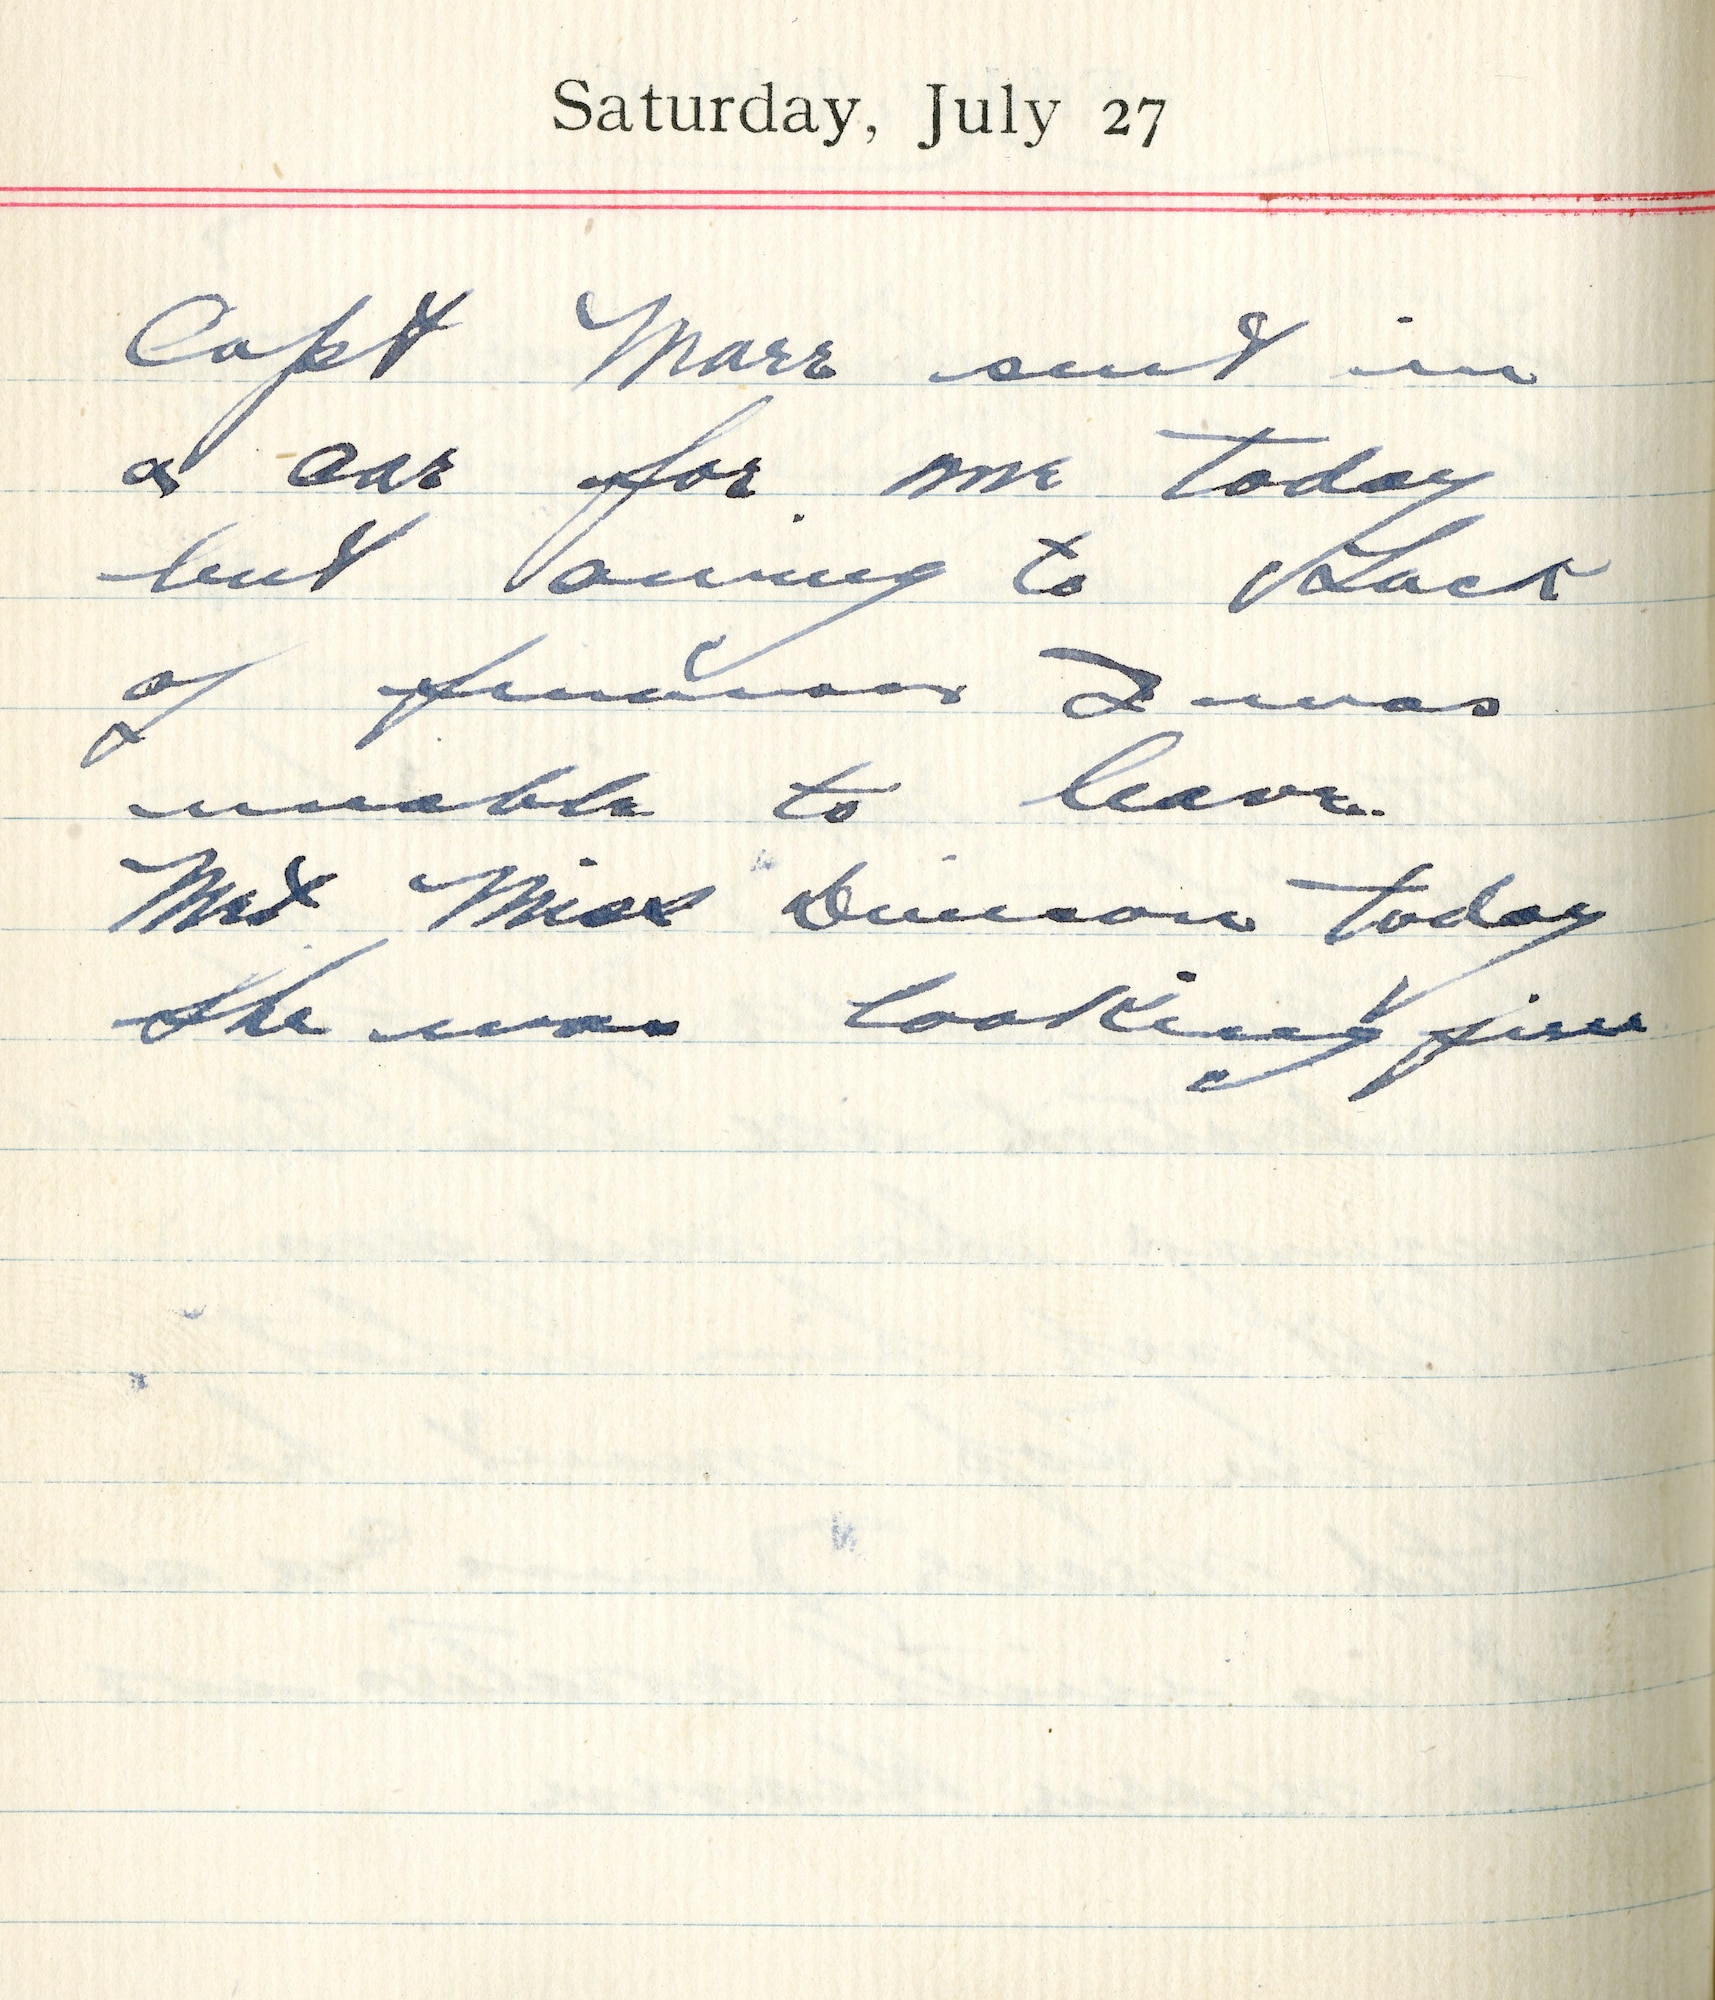 July 27, 1918-Capt Marr sent a car for me today but owing to lack of finances I was unable to leave.
  
Met Miss [illegible] today. She was looking fine.